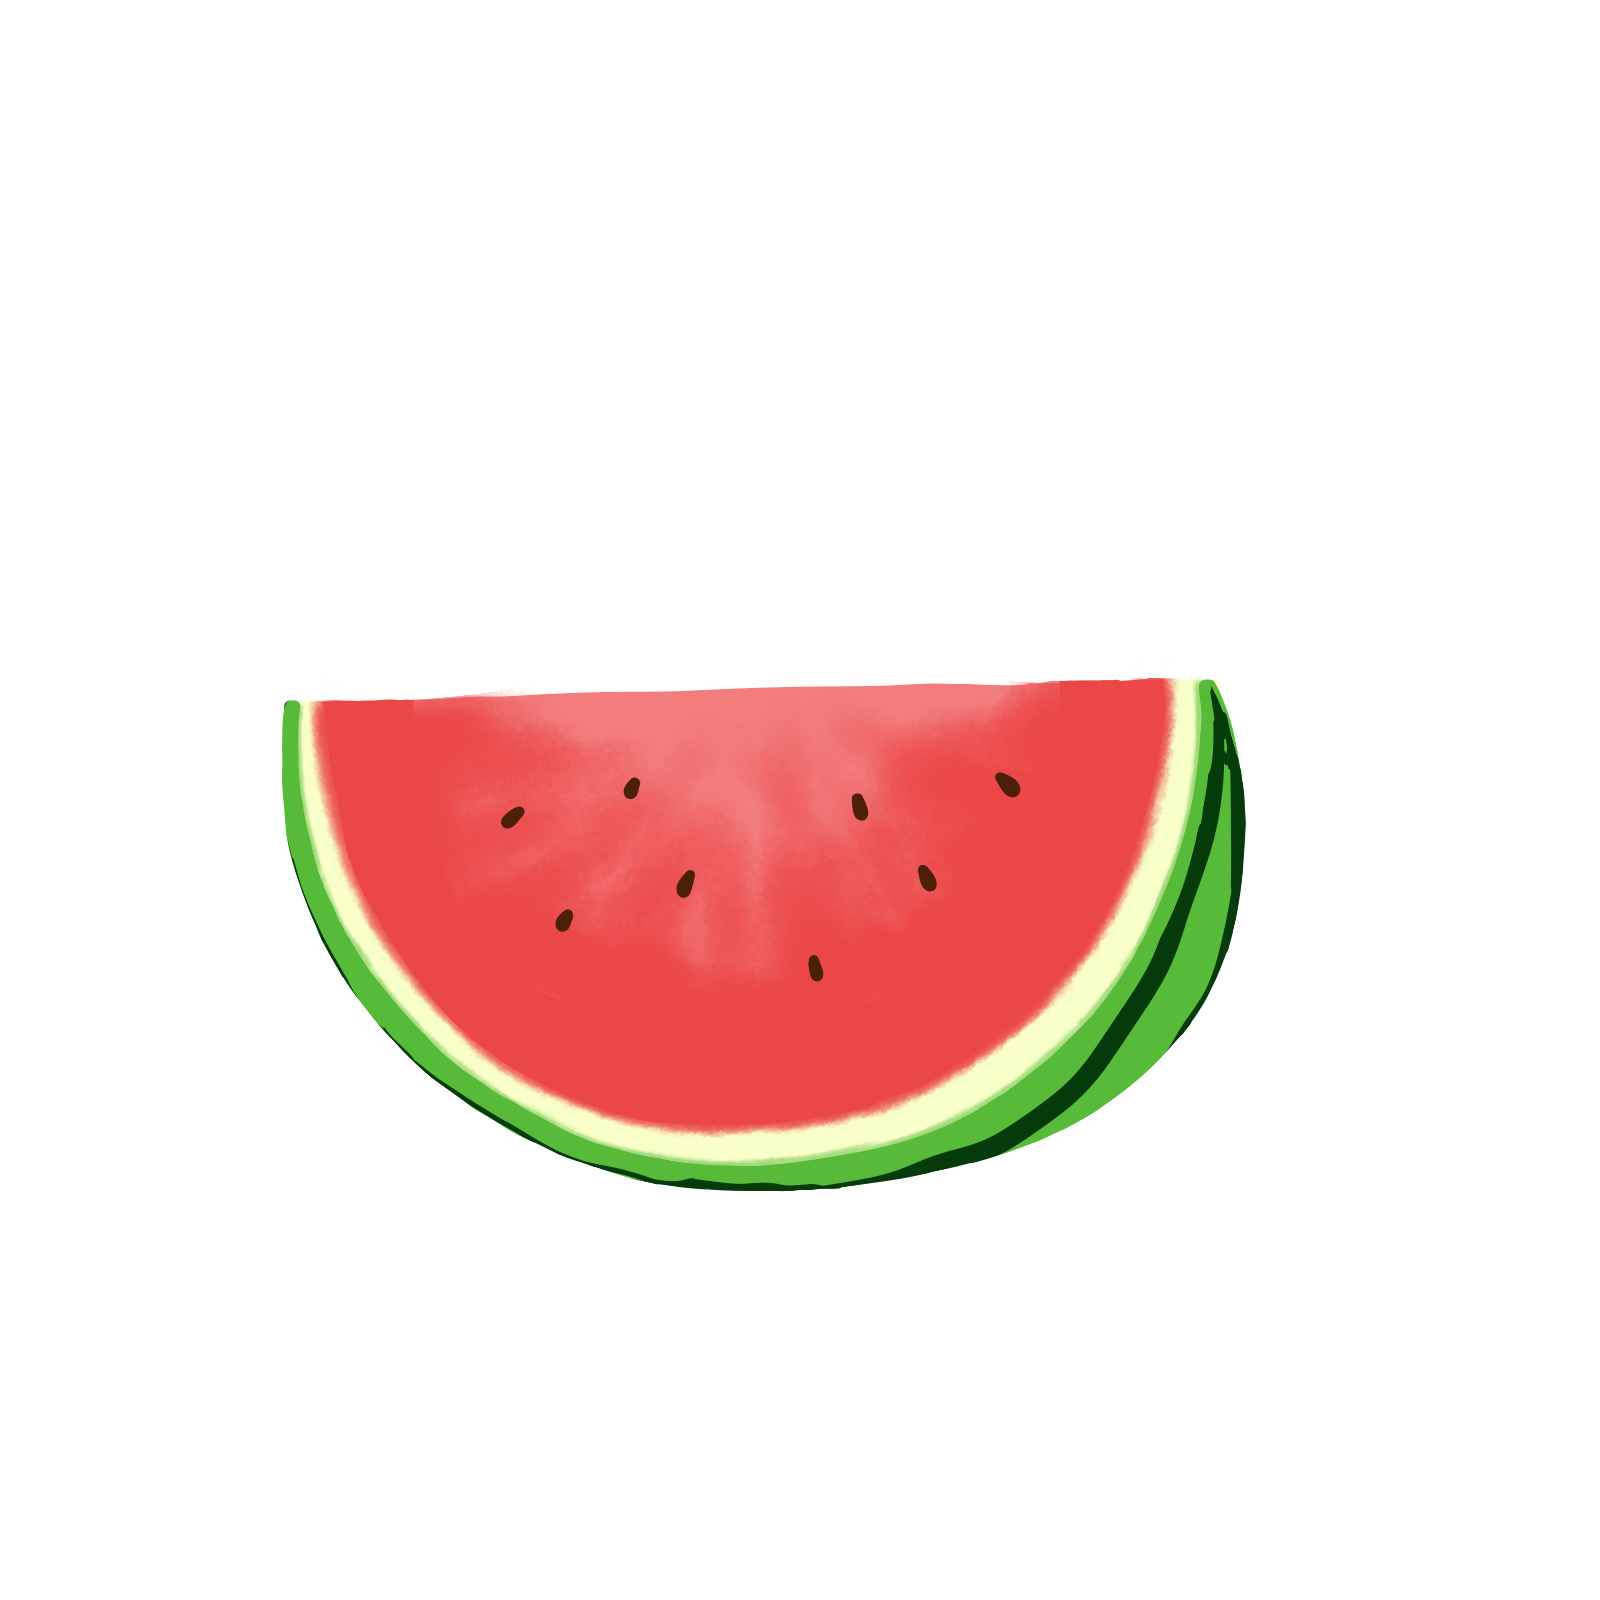 My Colour Pencil Painting Of A Slice Of Watermelon — Hive